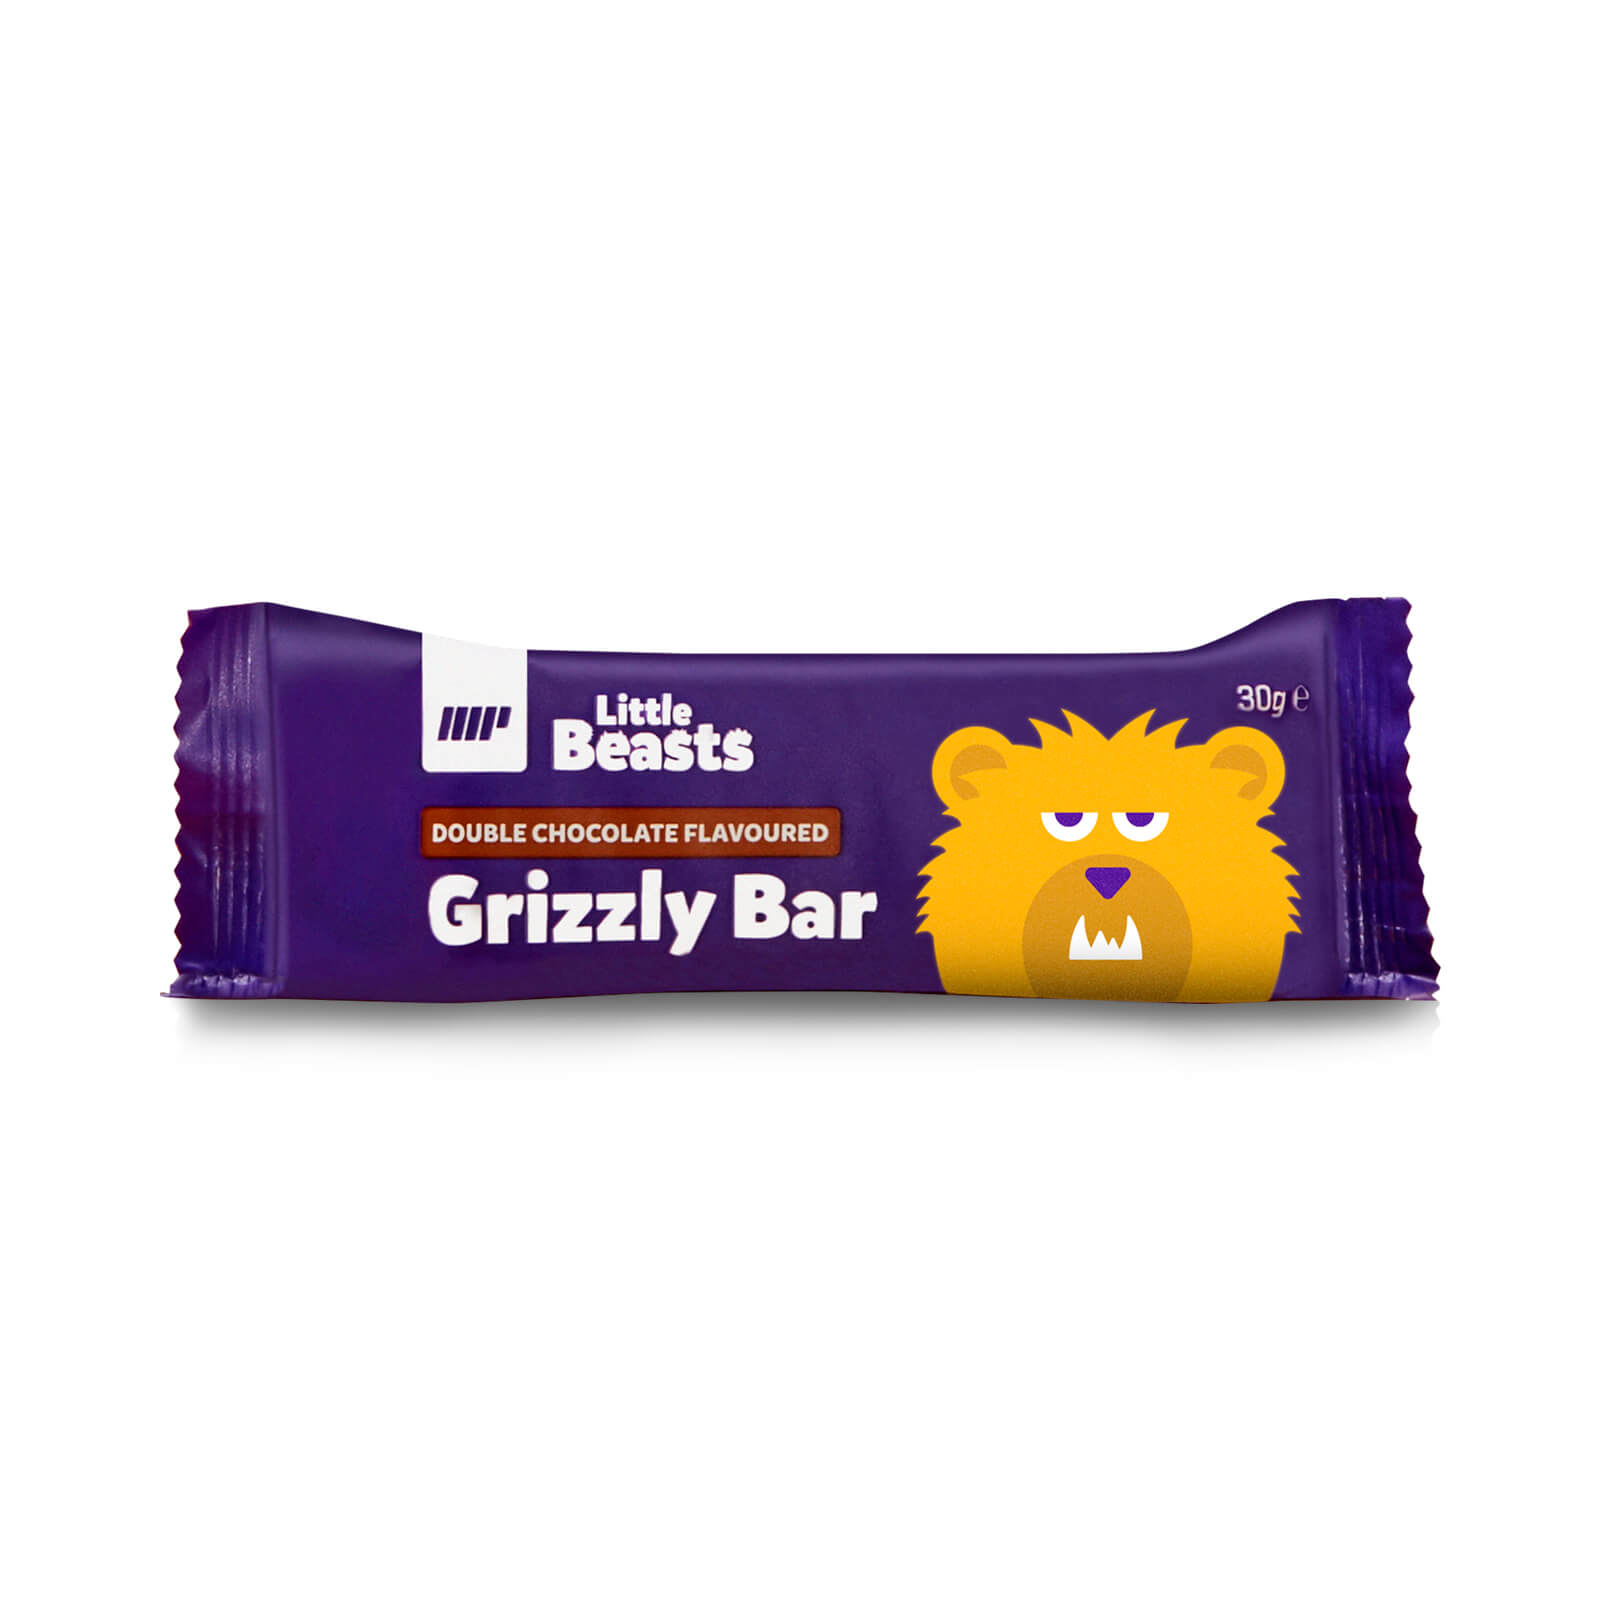 Little Beasts Grizzly Bar